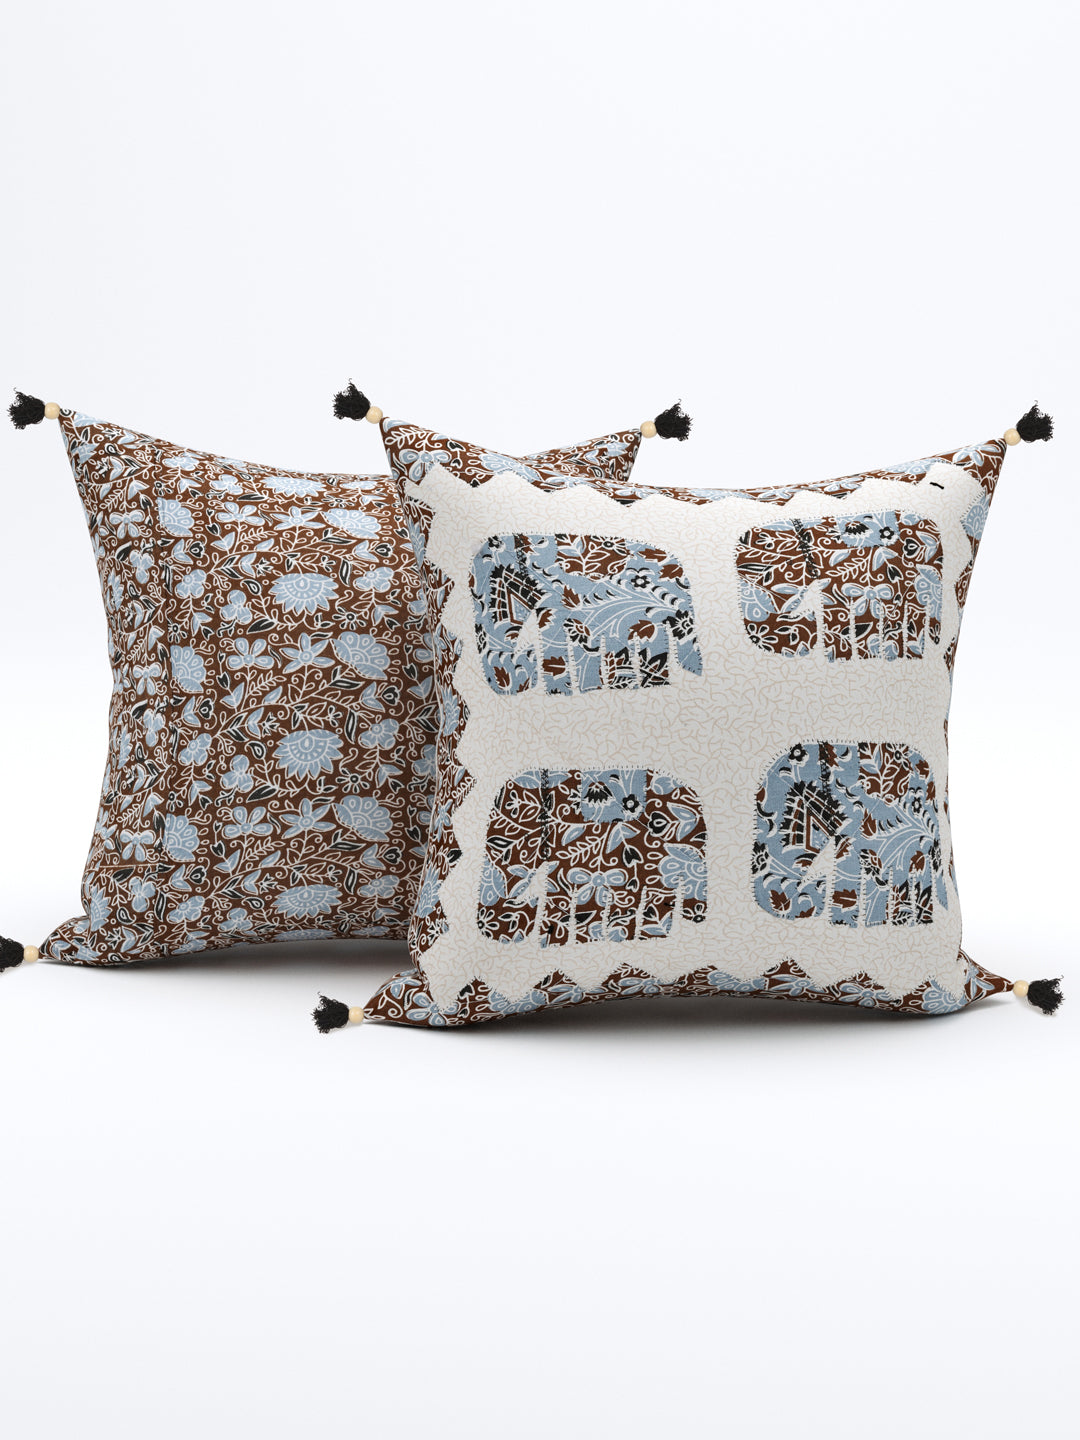 Living Roots Elephant Patchwork Cotton Cushion Cover- Set of 5 (40-029-B)